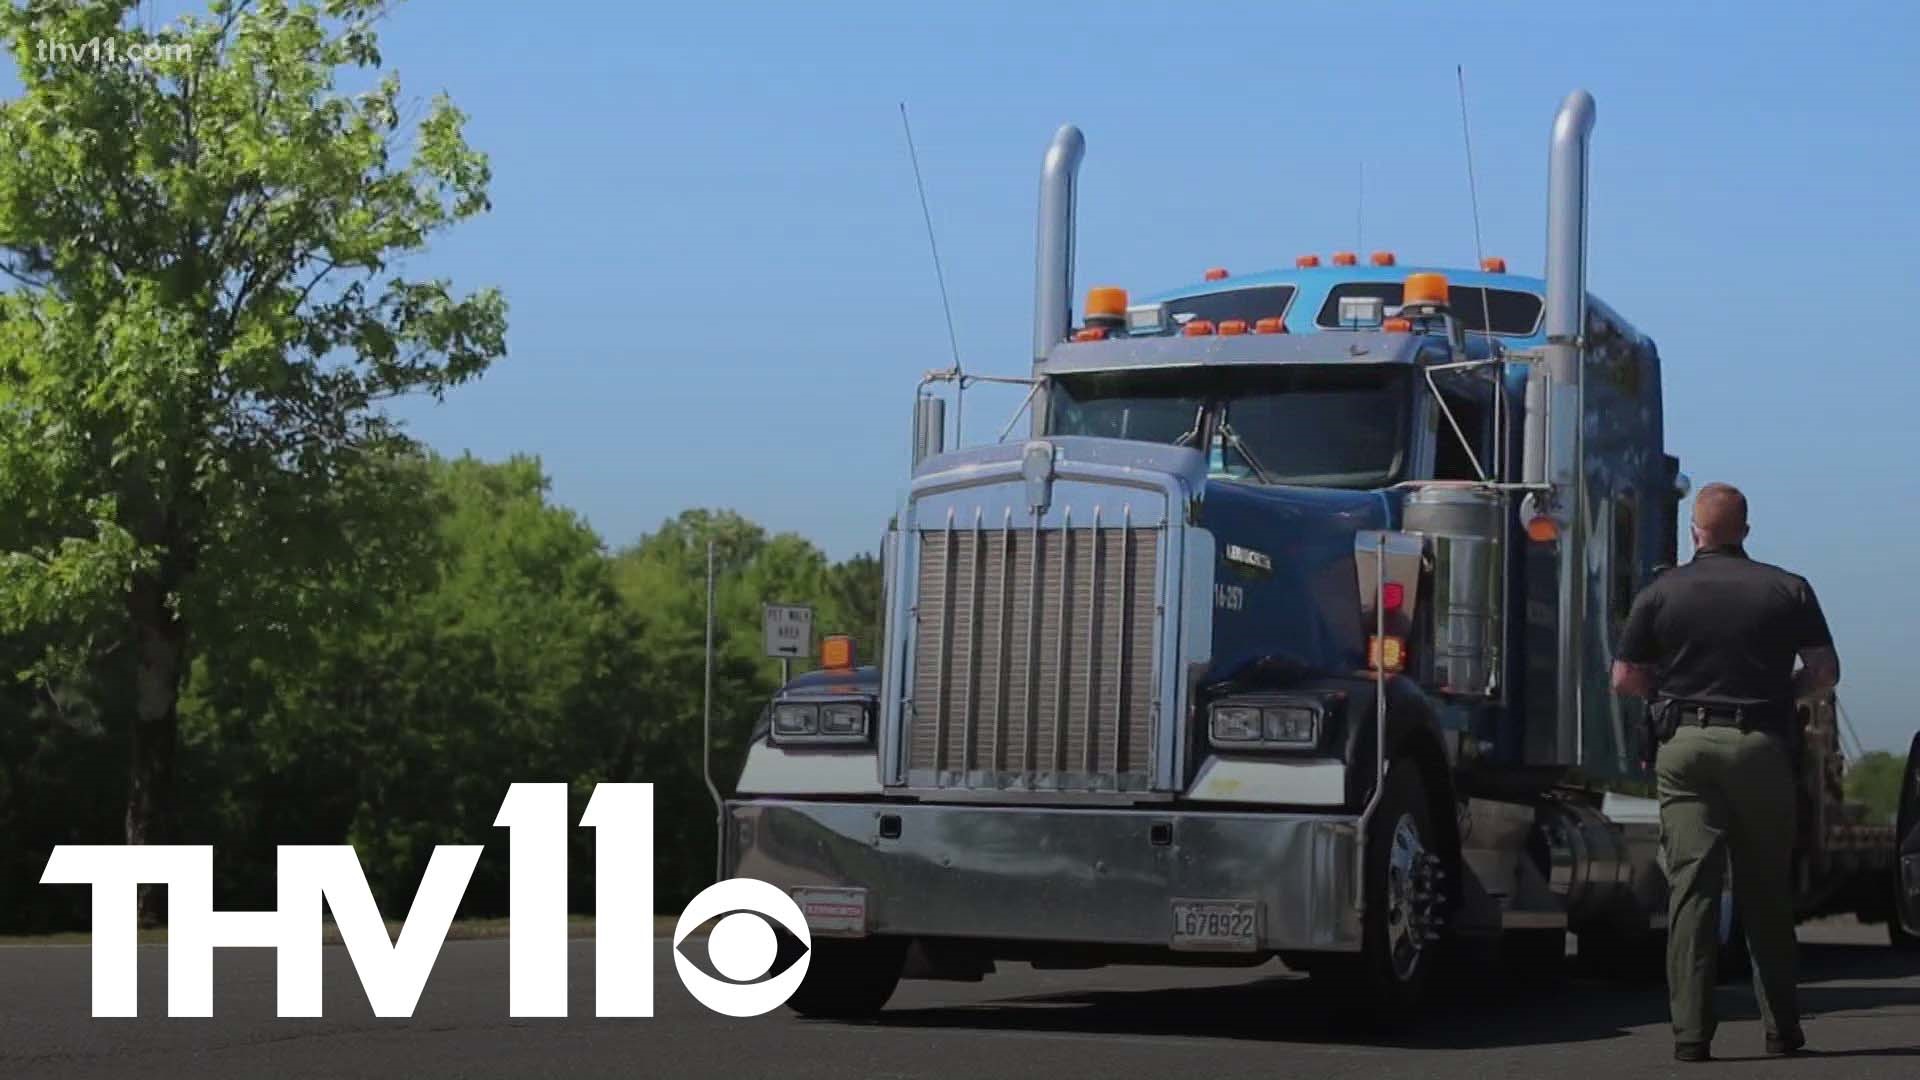 COVID-19 has resulted in labor shortages for countless industries, including for those that are truck drivers. But, a new program might help fill the need.